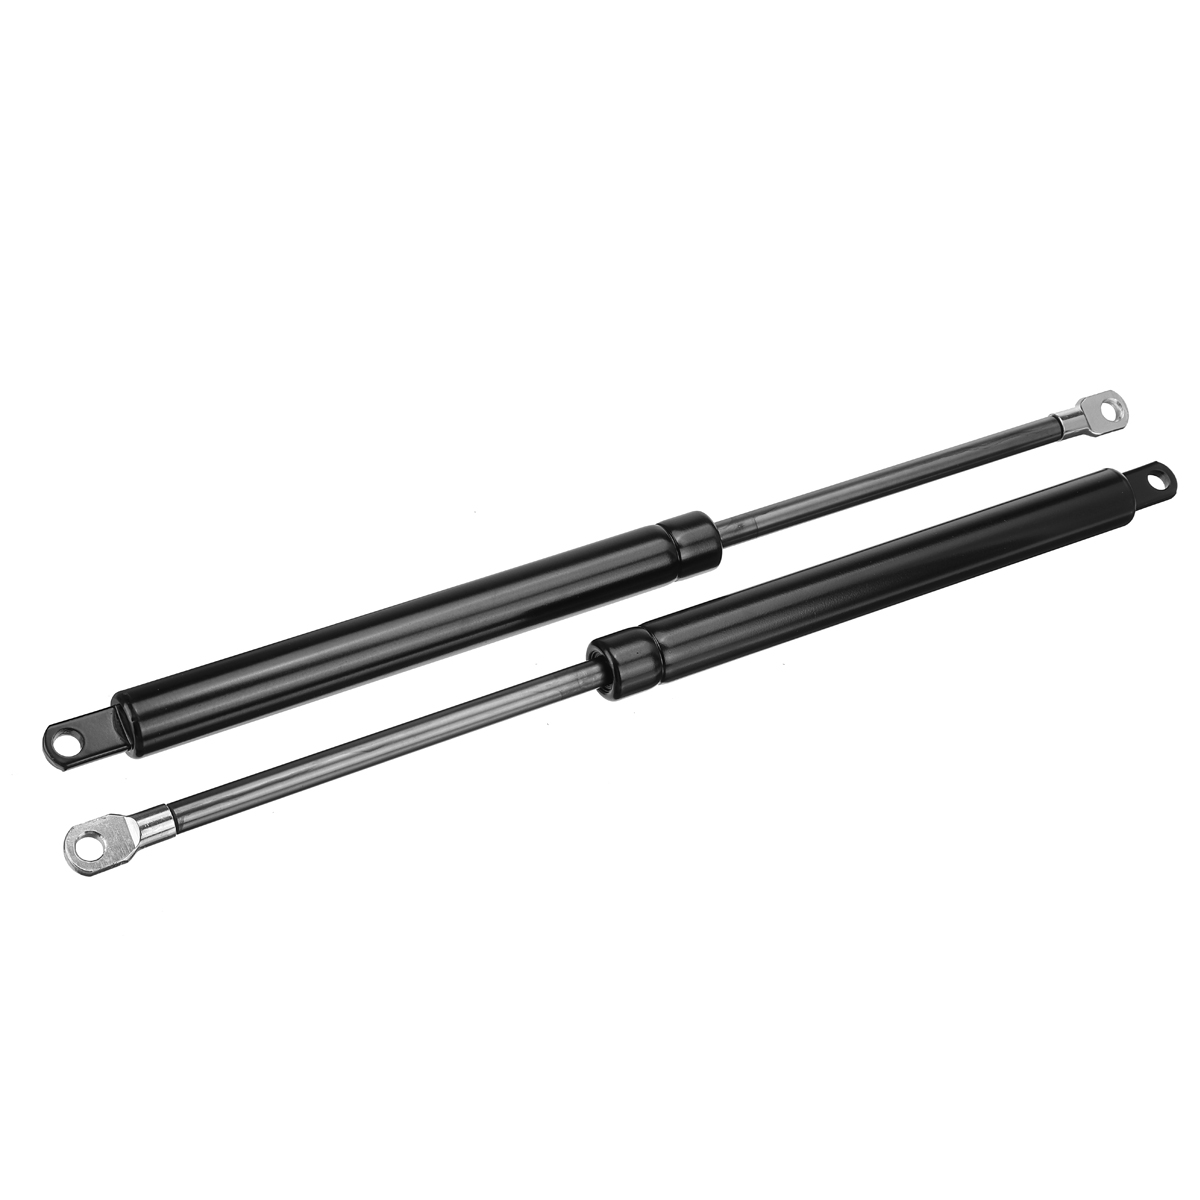 2Pcs-310-810mm-Extended-100-350-Compressed-Universal-800N-Force-Gas-Springs-Struts-Lifters-Supports--1777718-7